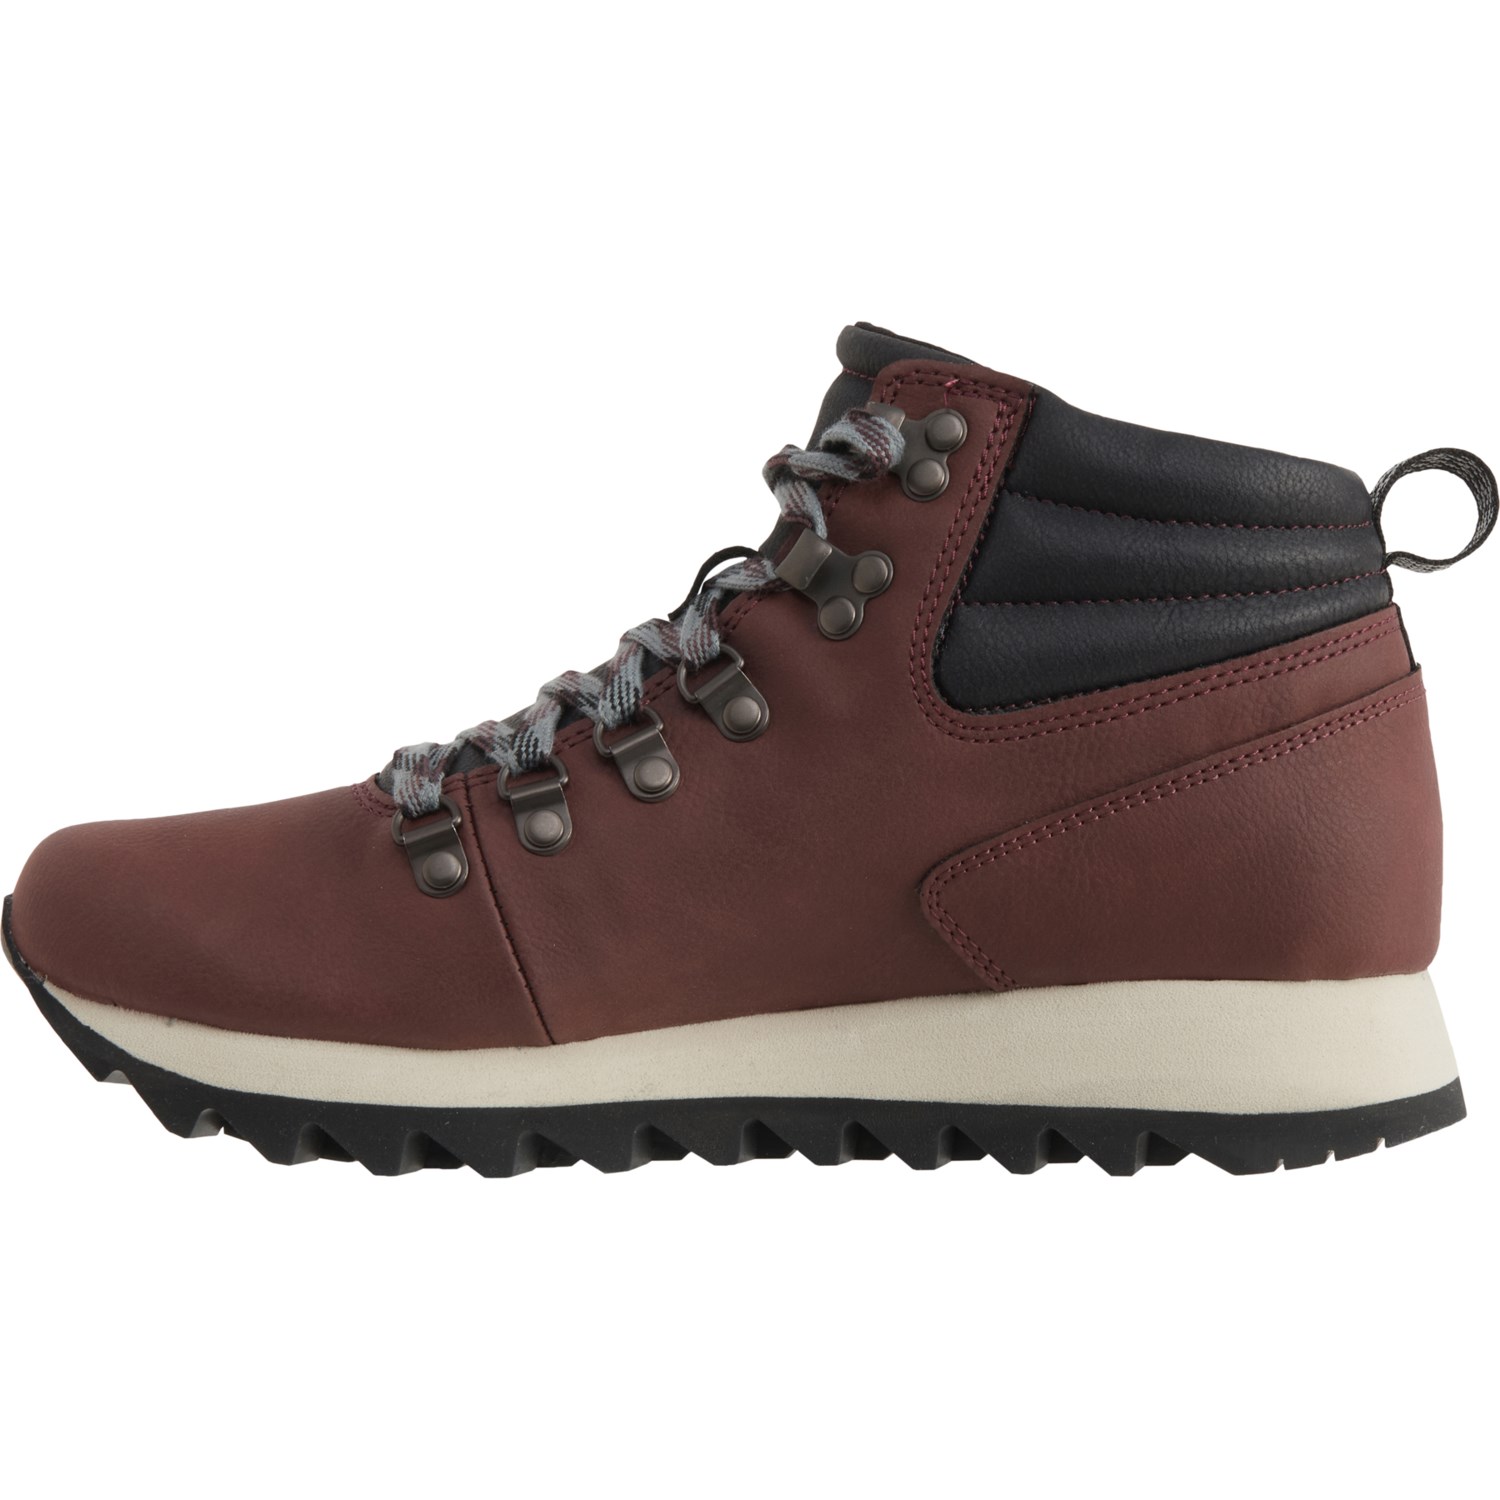 Merrell Alpine Hiking Boots (For Women) - Save 48%